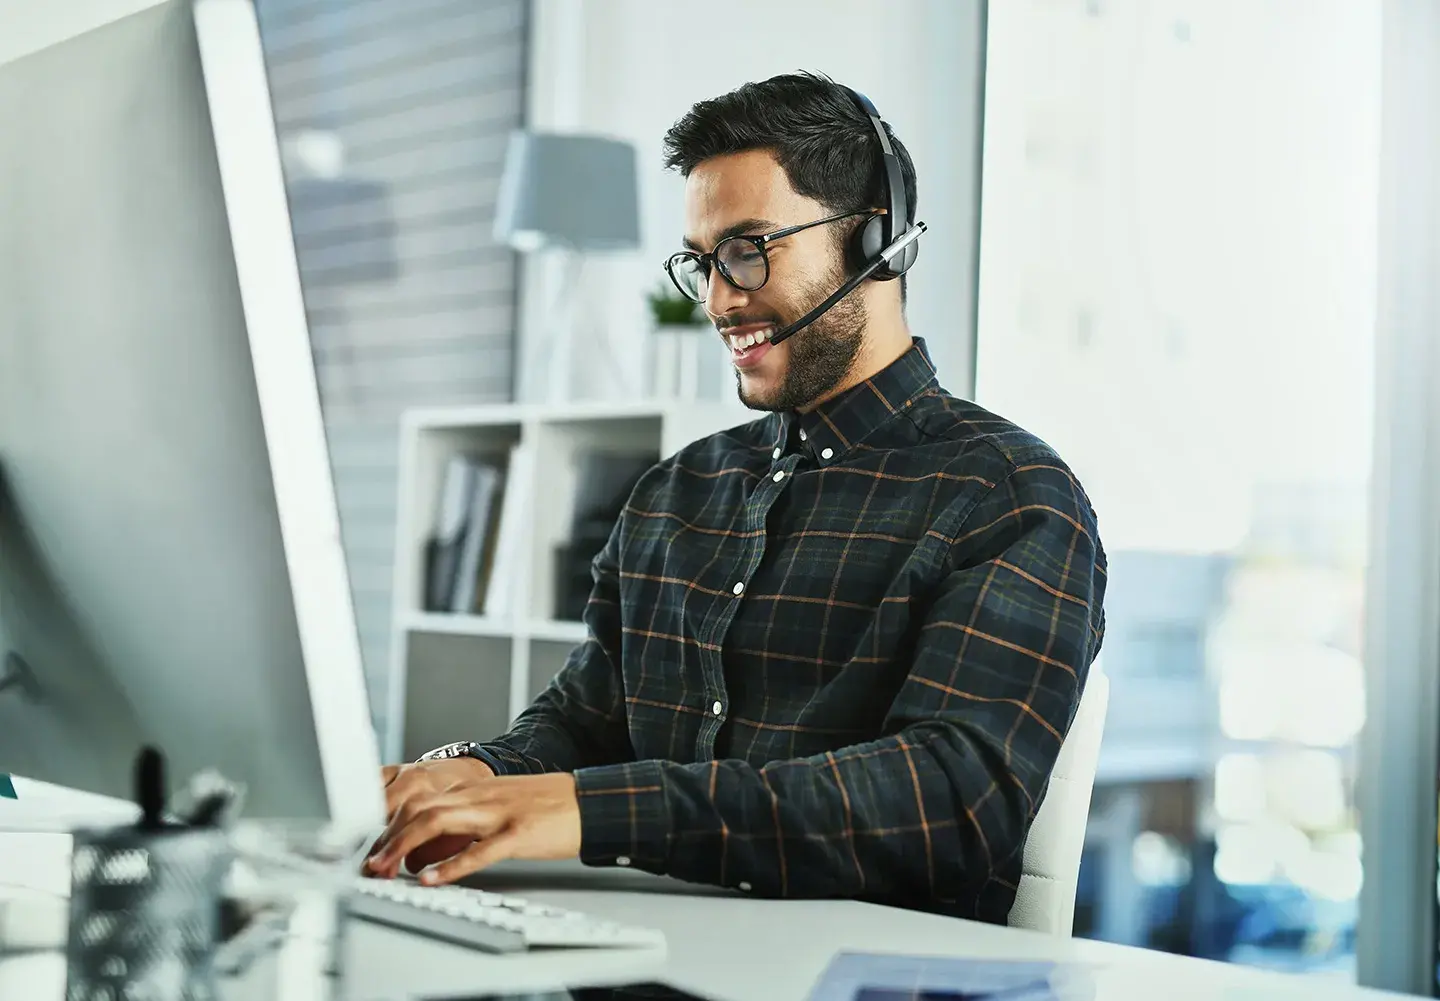 Customer service representative at his desk talking on a headset to a customer